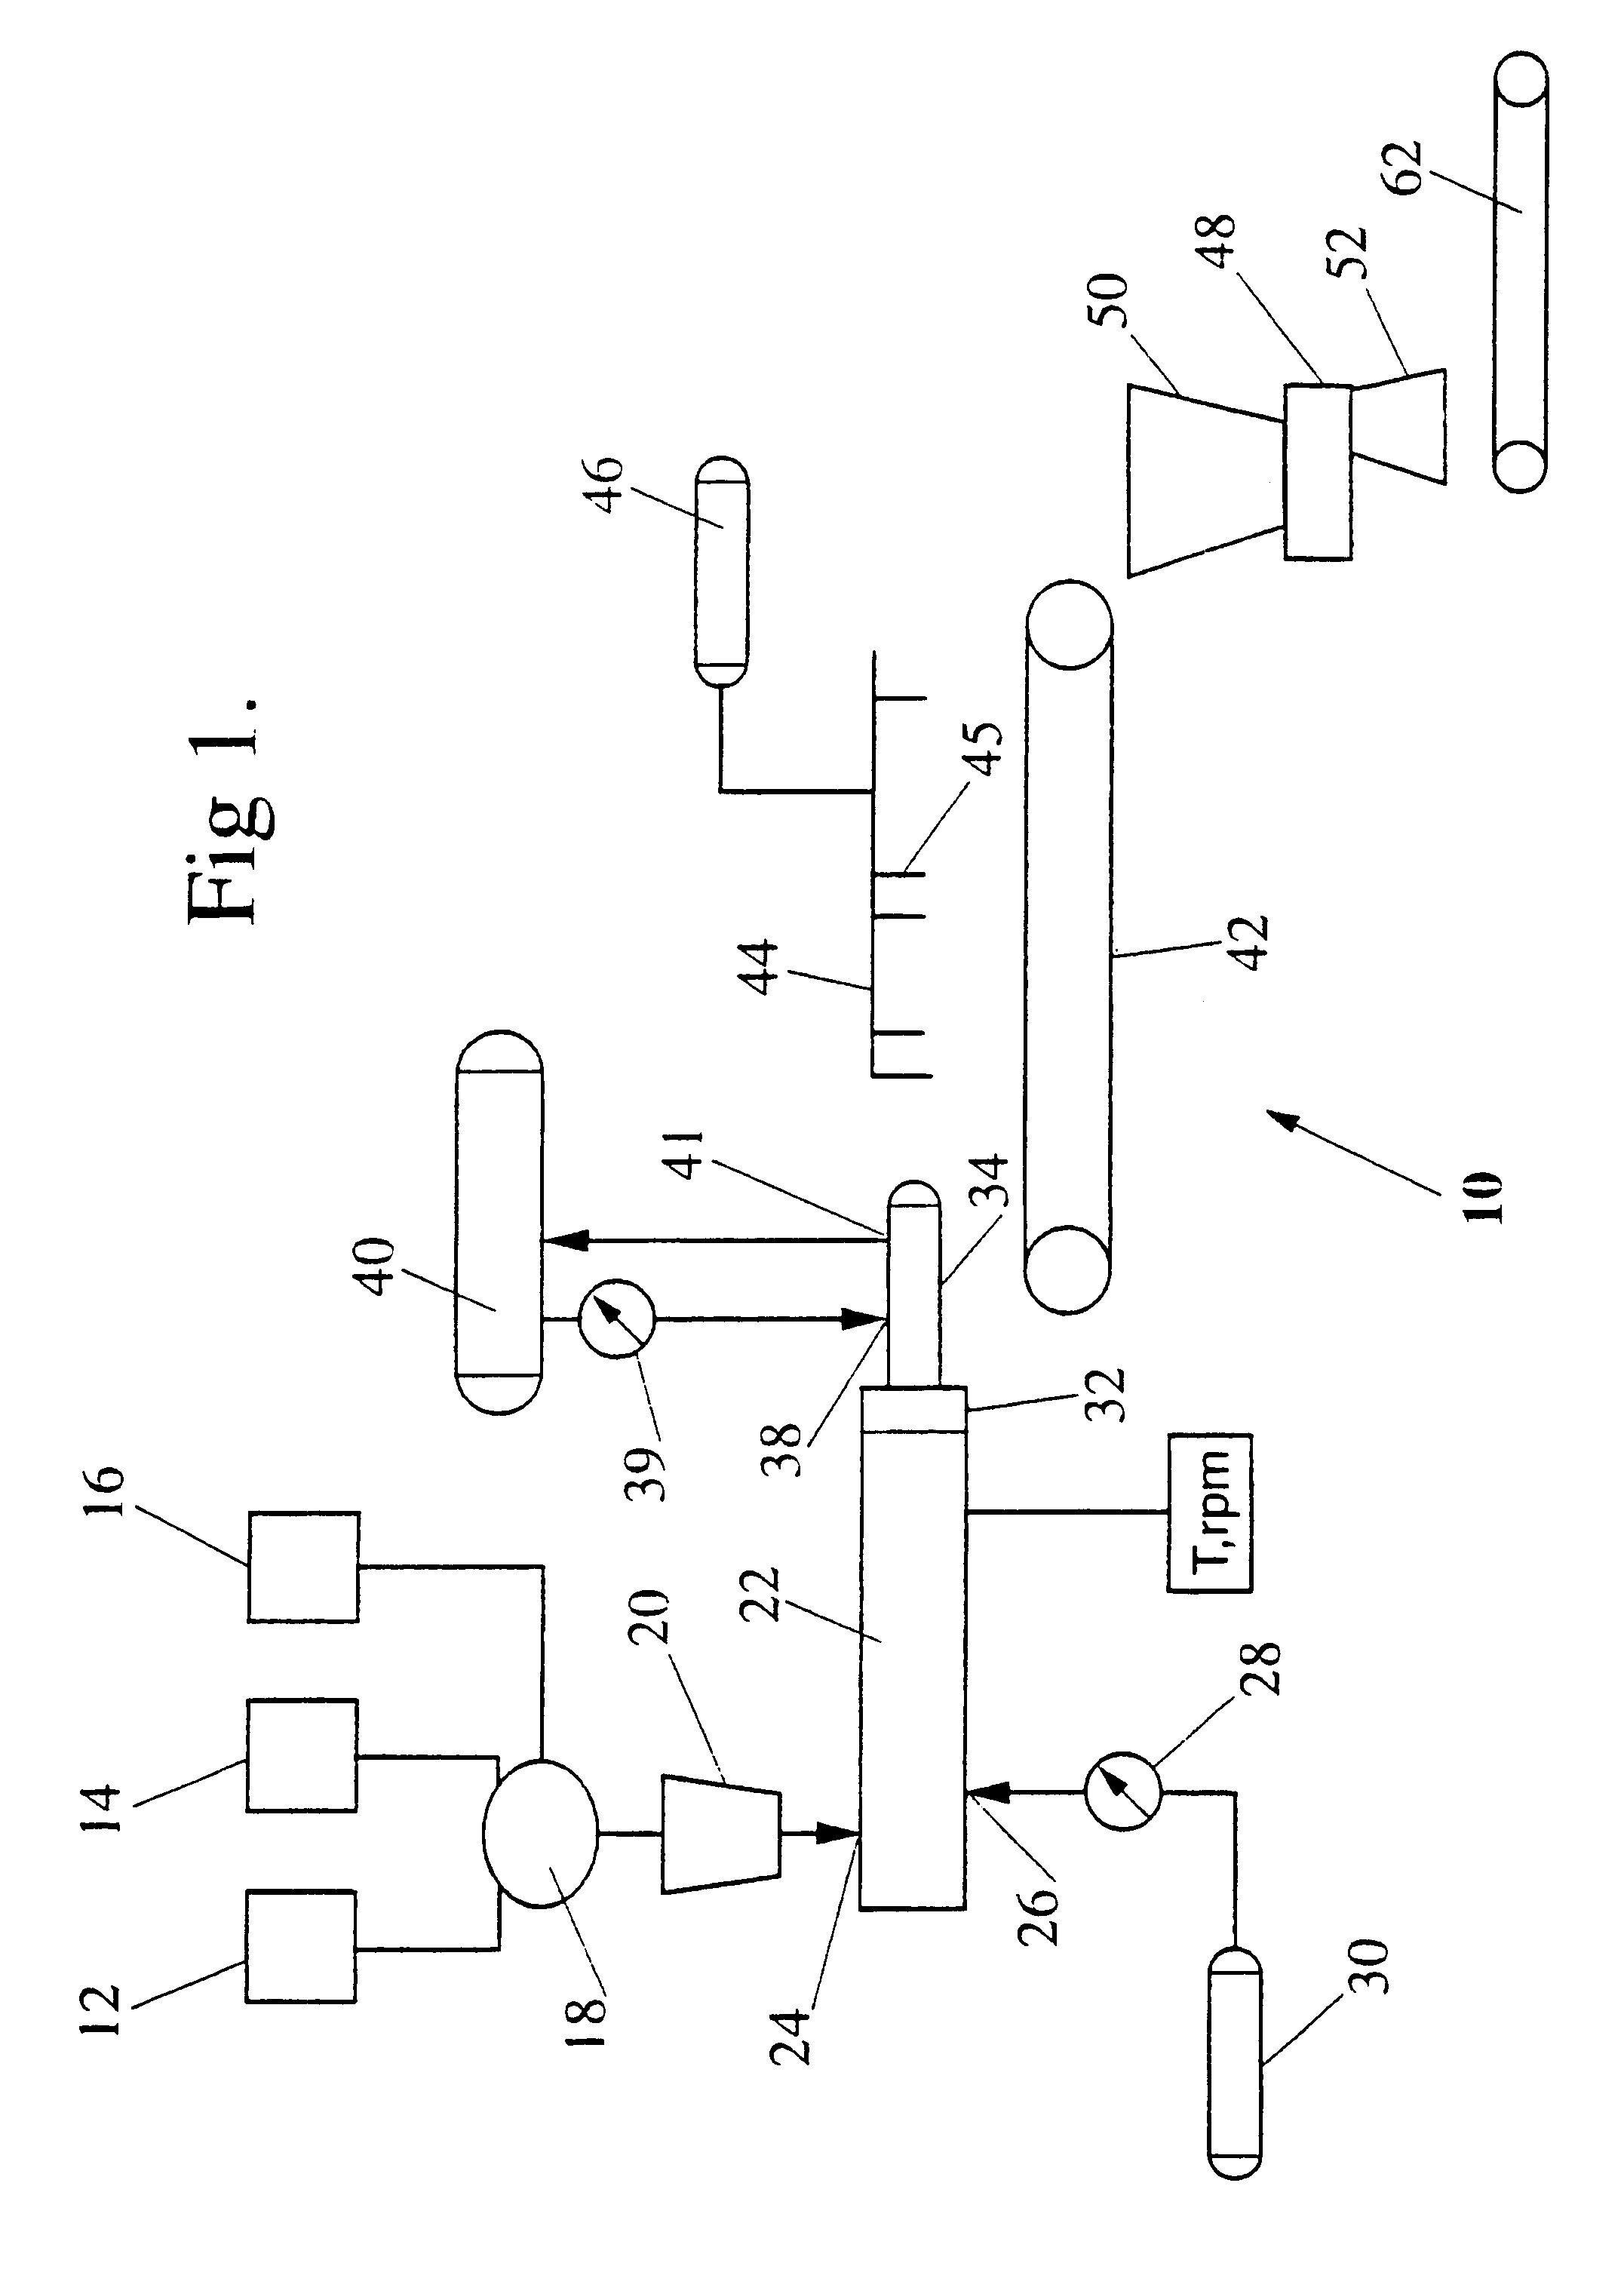 Method and apparatus for the manufacture of meat